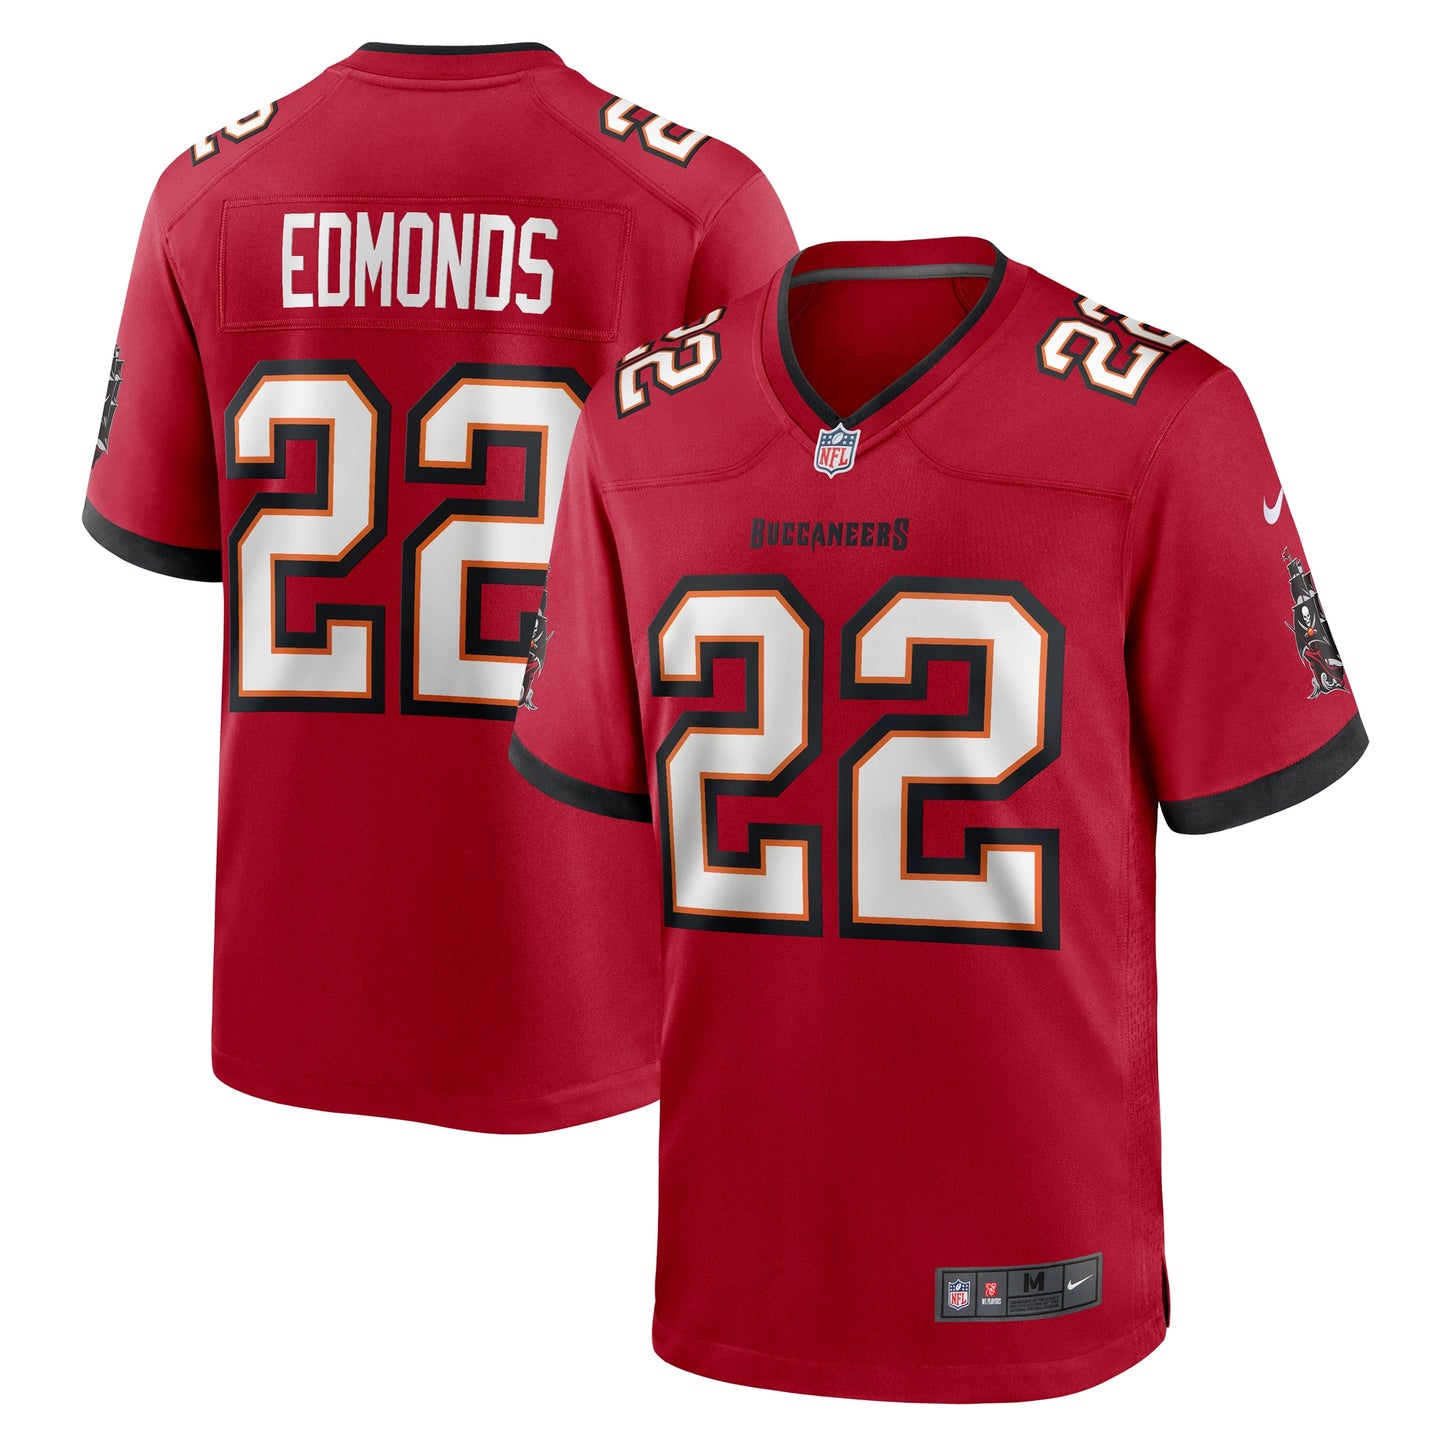 Chase Edmonds Tampa Bay Buccaneers Nike Game Jersey - Red